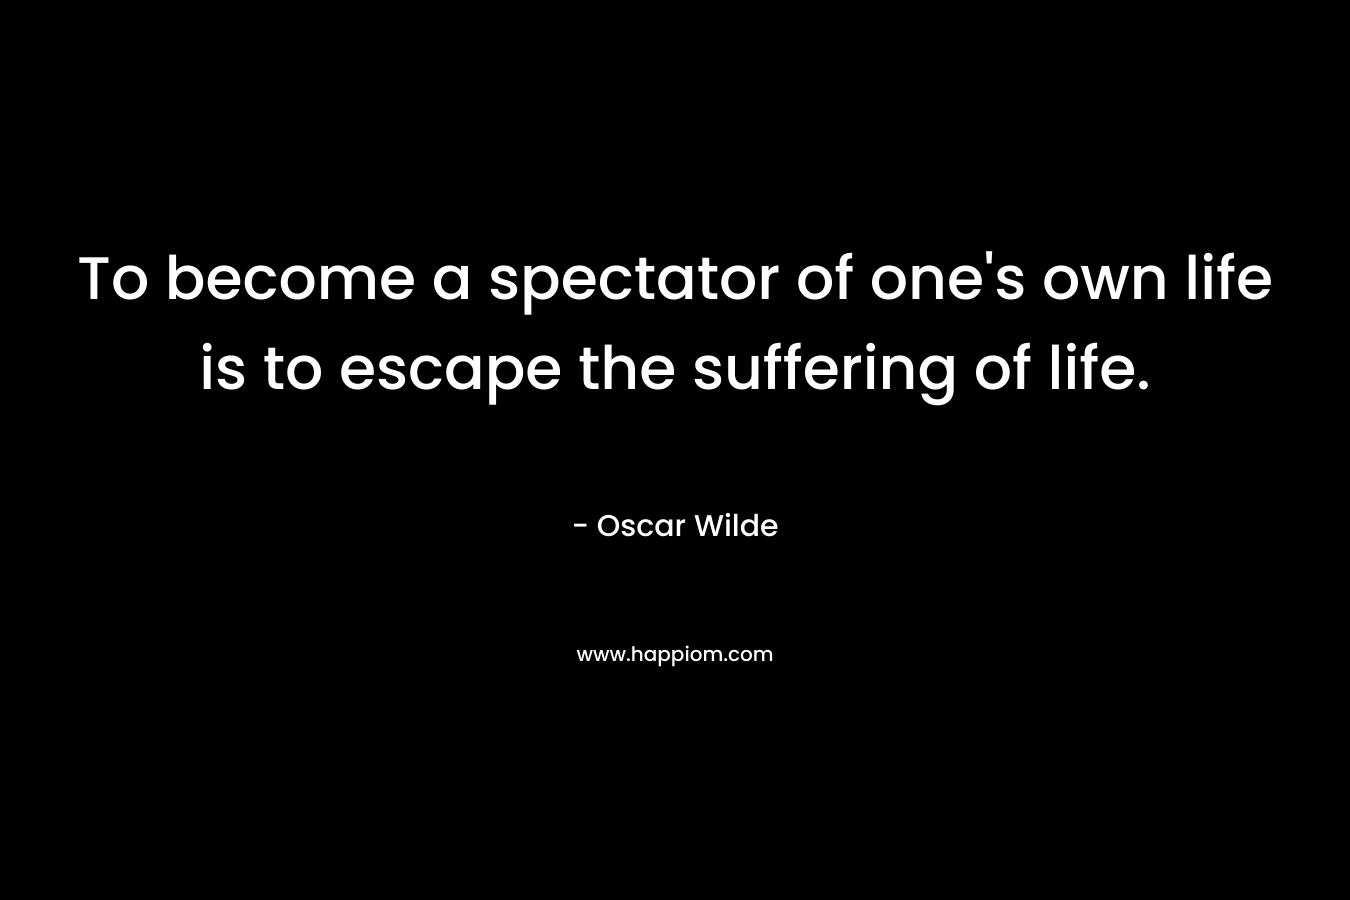 To become a spectator of one's own life is to escape the suffering of life.